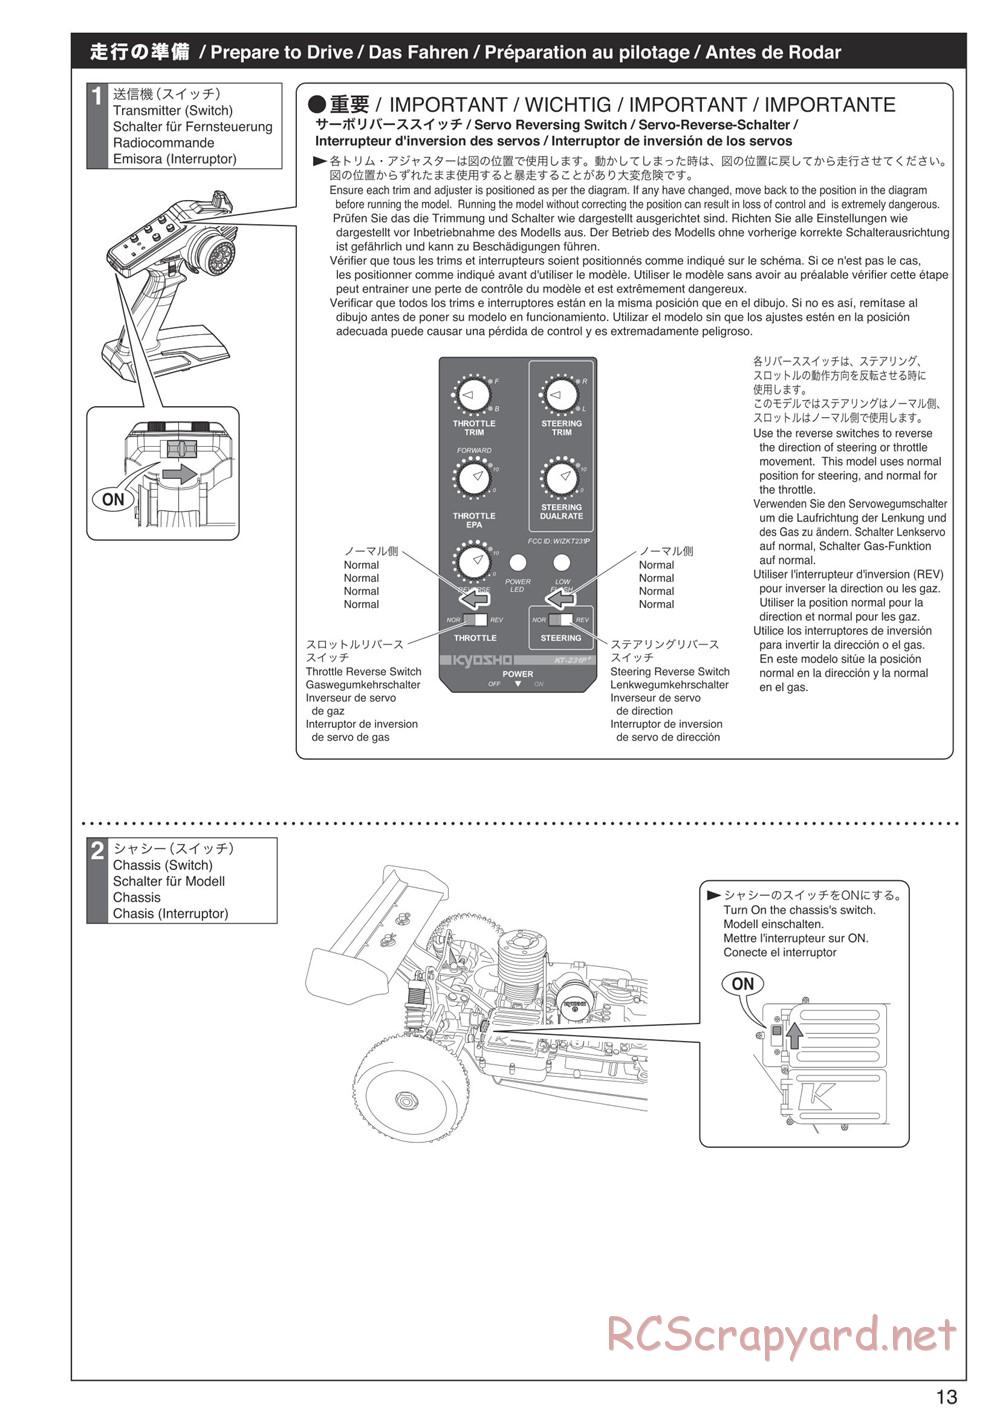 Kyosho - Inferno Neo 3.0 - Manual - Page 13